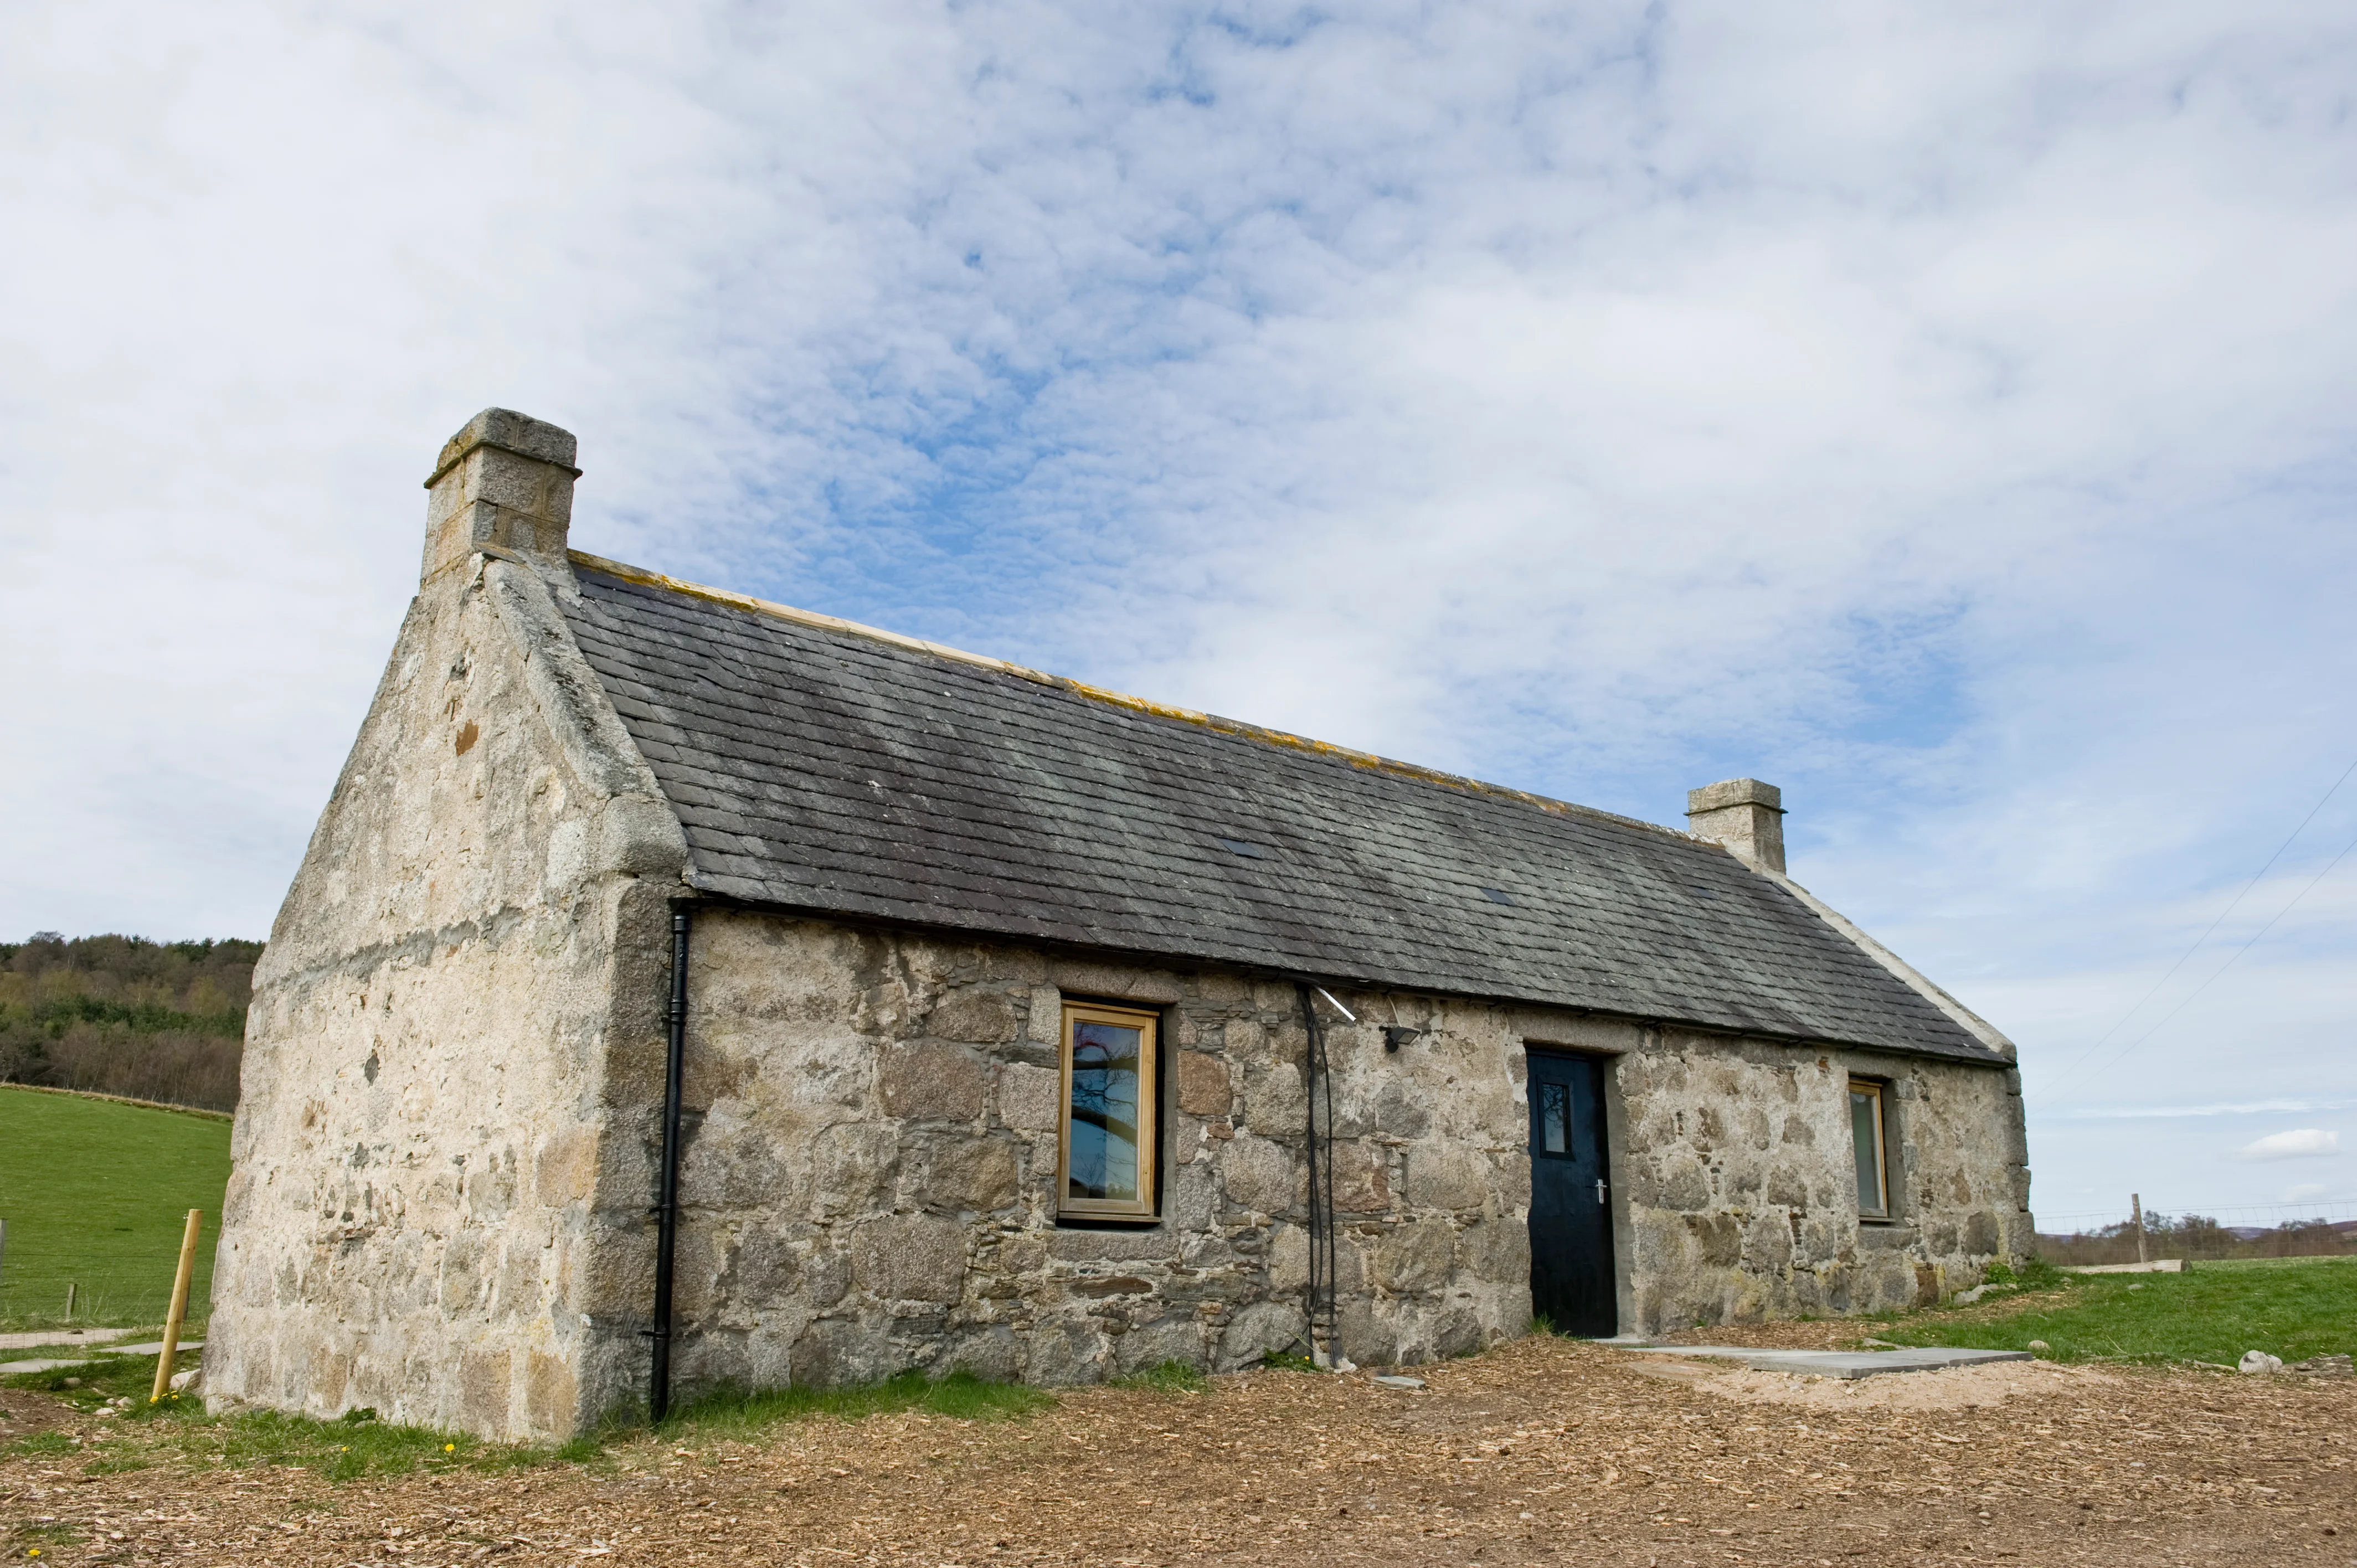 Our bothy sleeps 6 additional people and sits adjacent to our bunkhouse